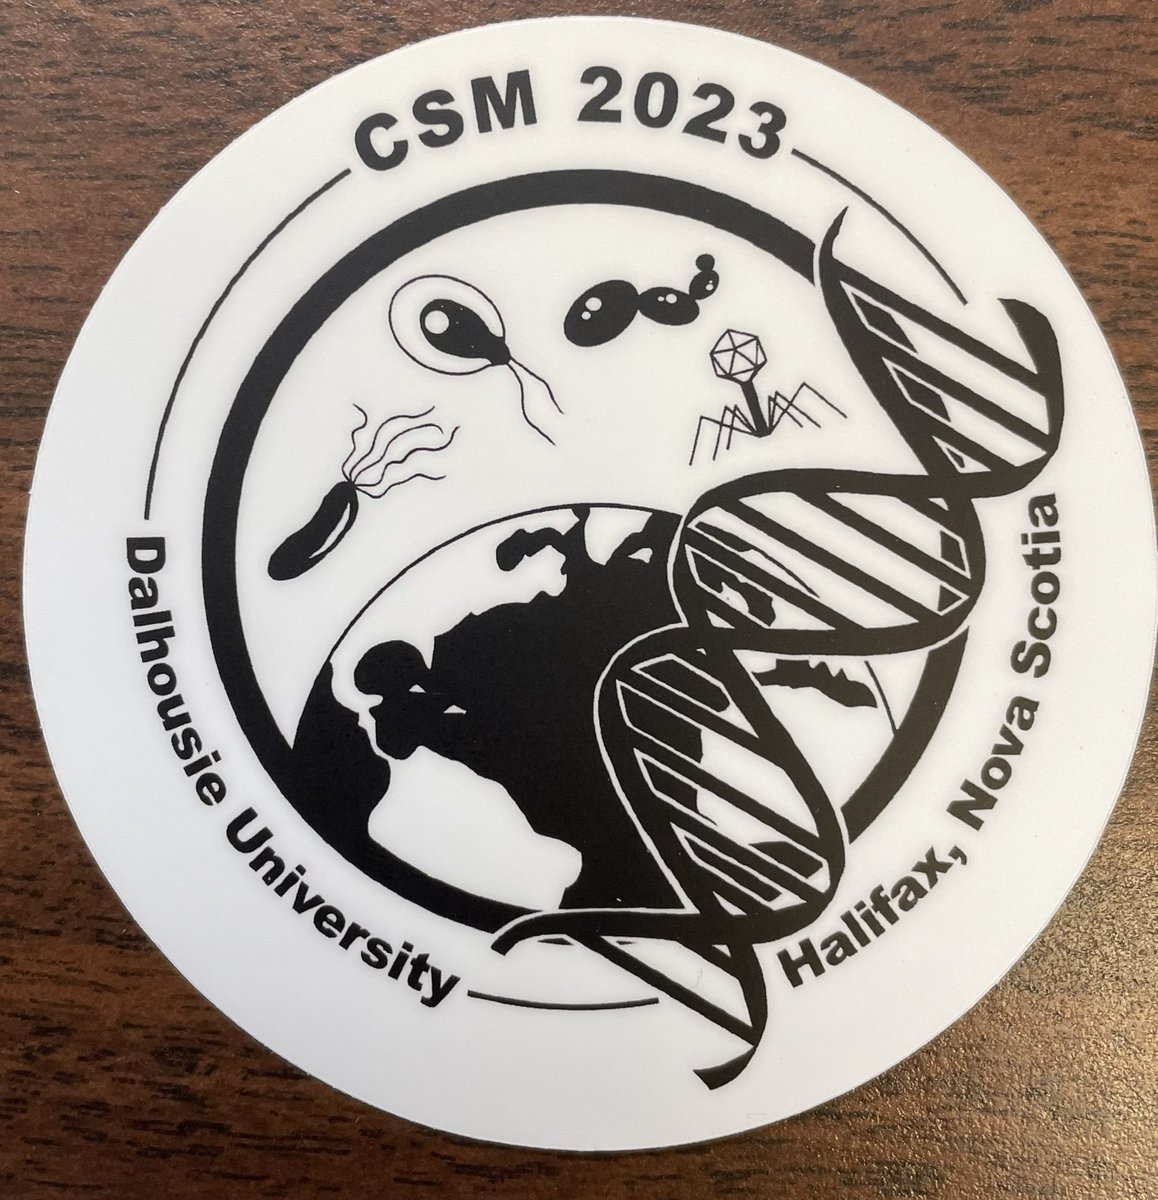 That’s an end of @CSM2023_Halifax !
What an incredible week of networking and science.

Now go forward, continue your awesome science, and strengthen our @CSM_SCM society.